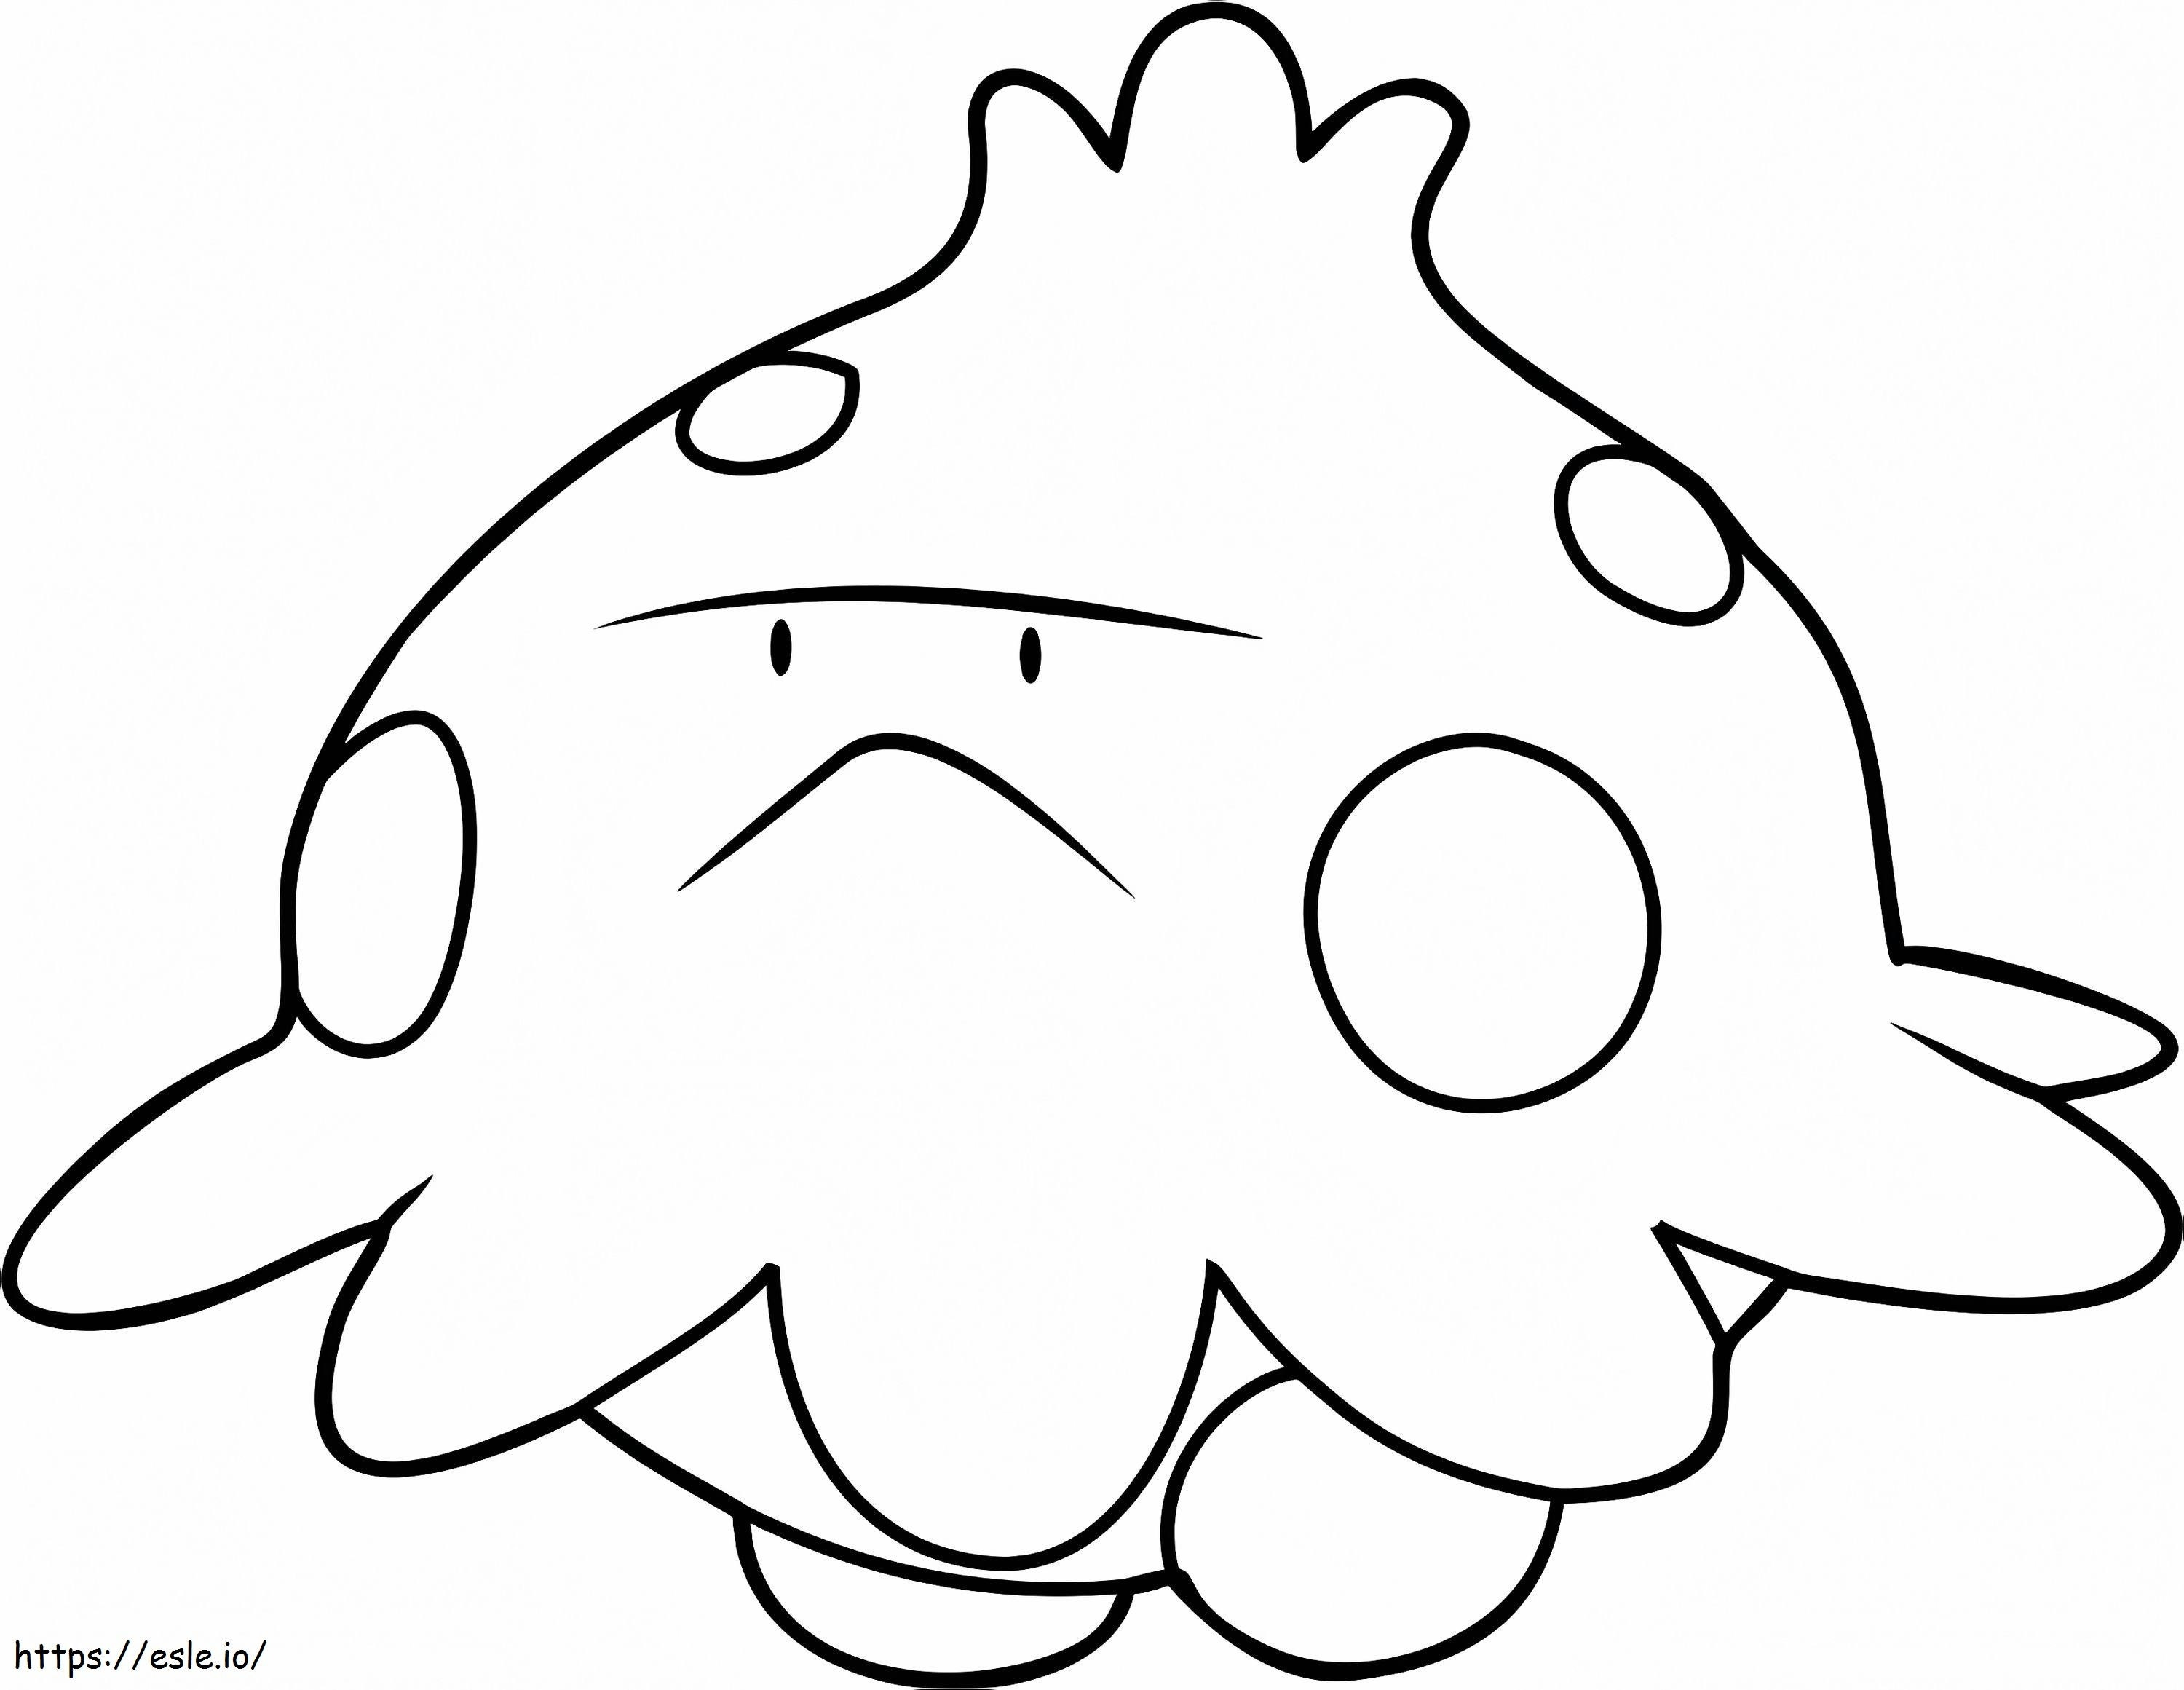 Shroomish Gen 3 Pokemon coloring page